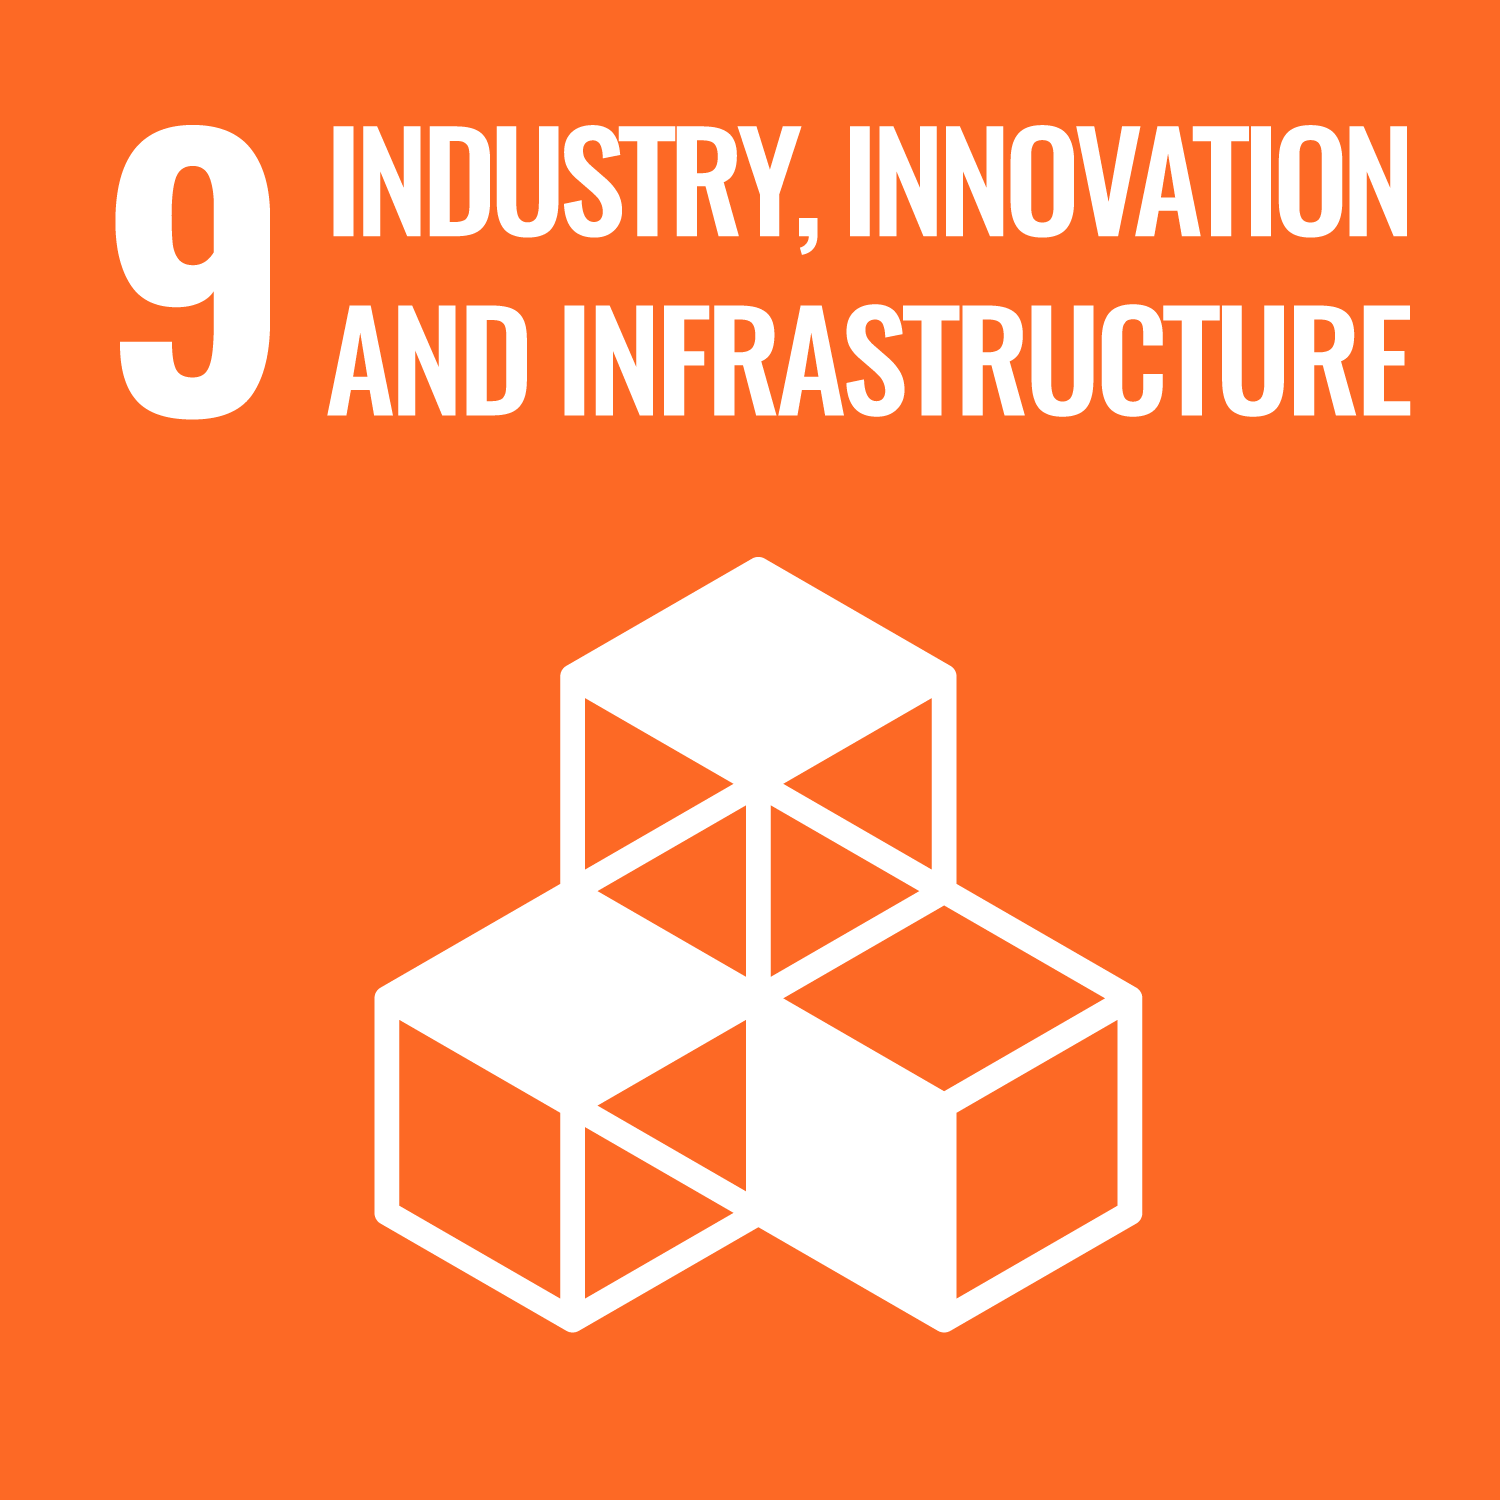 9. Industry Innovation And Infrastructure